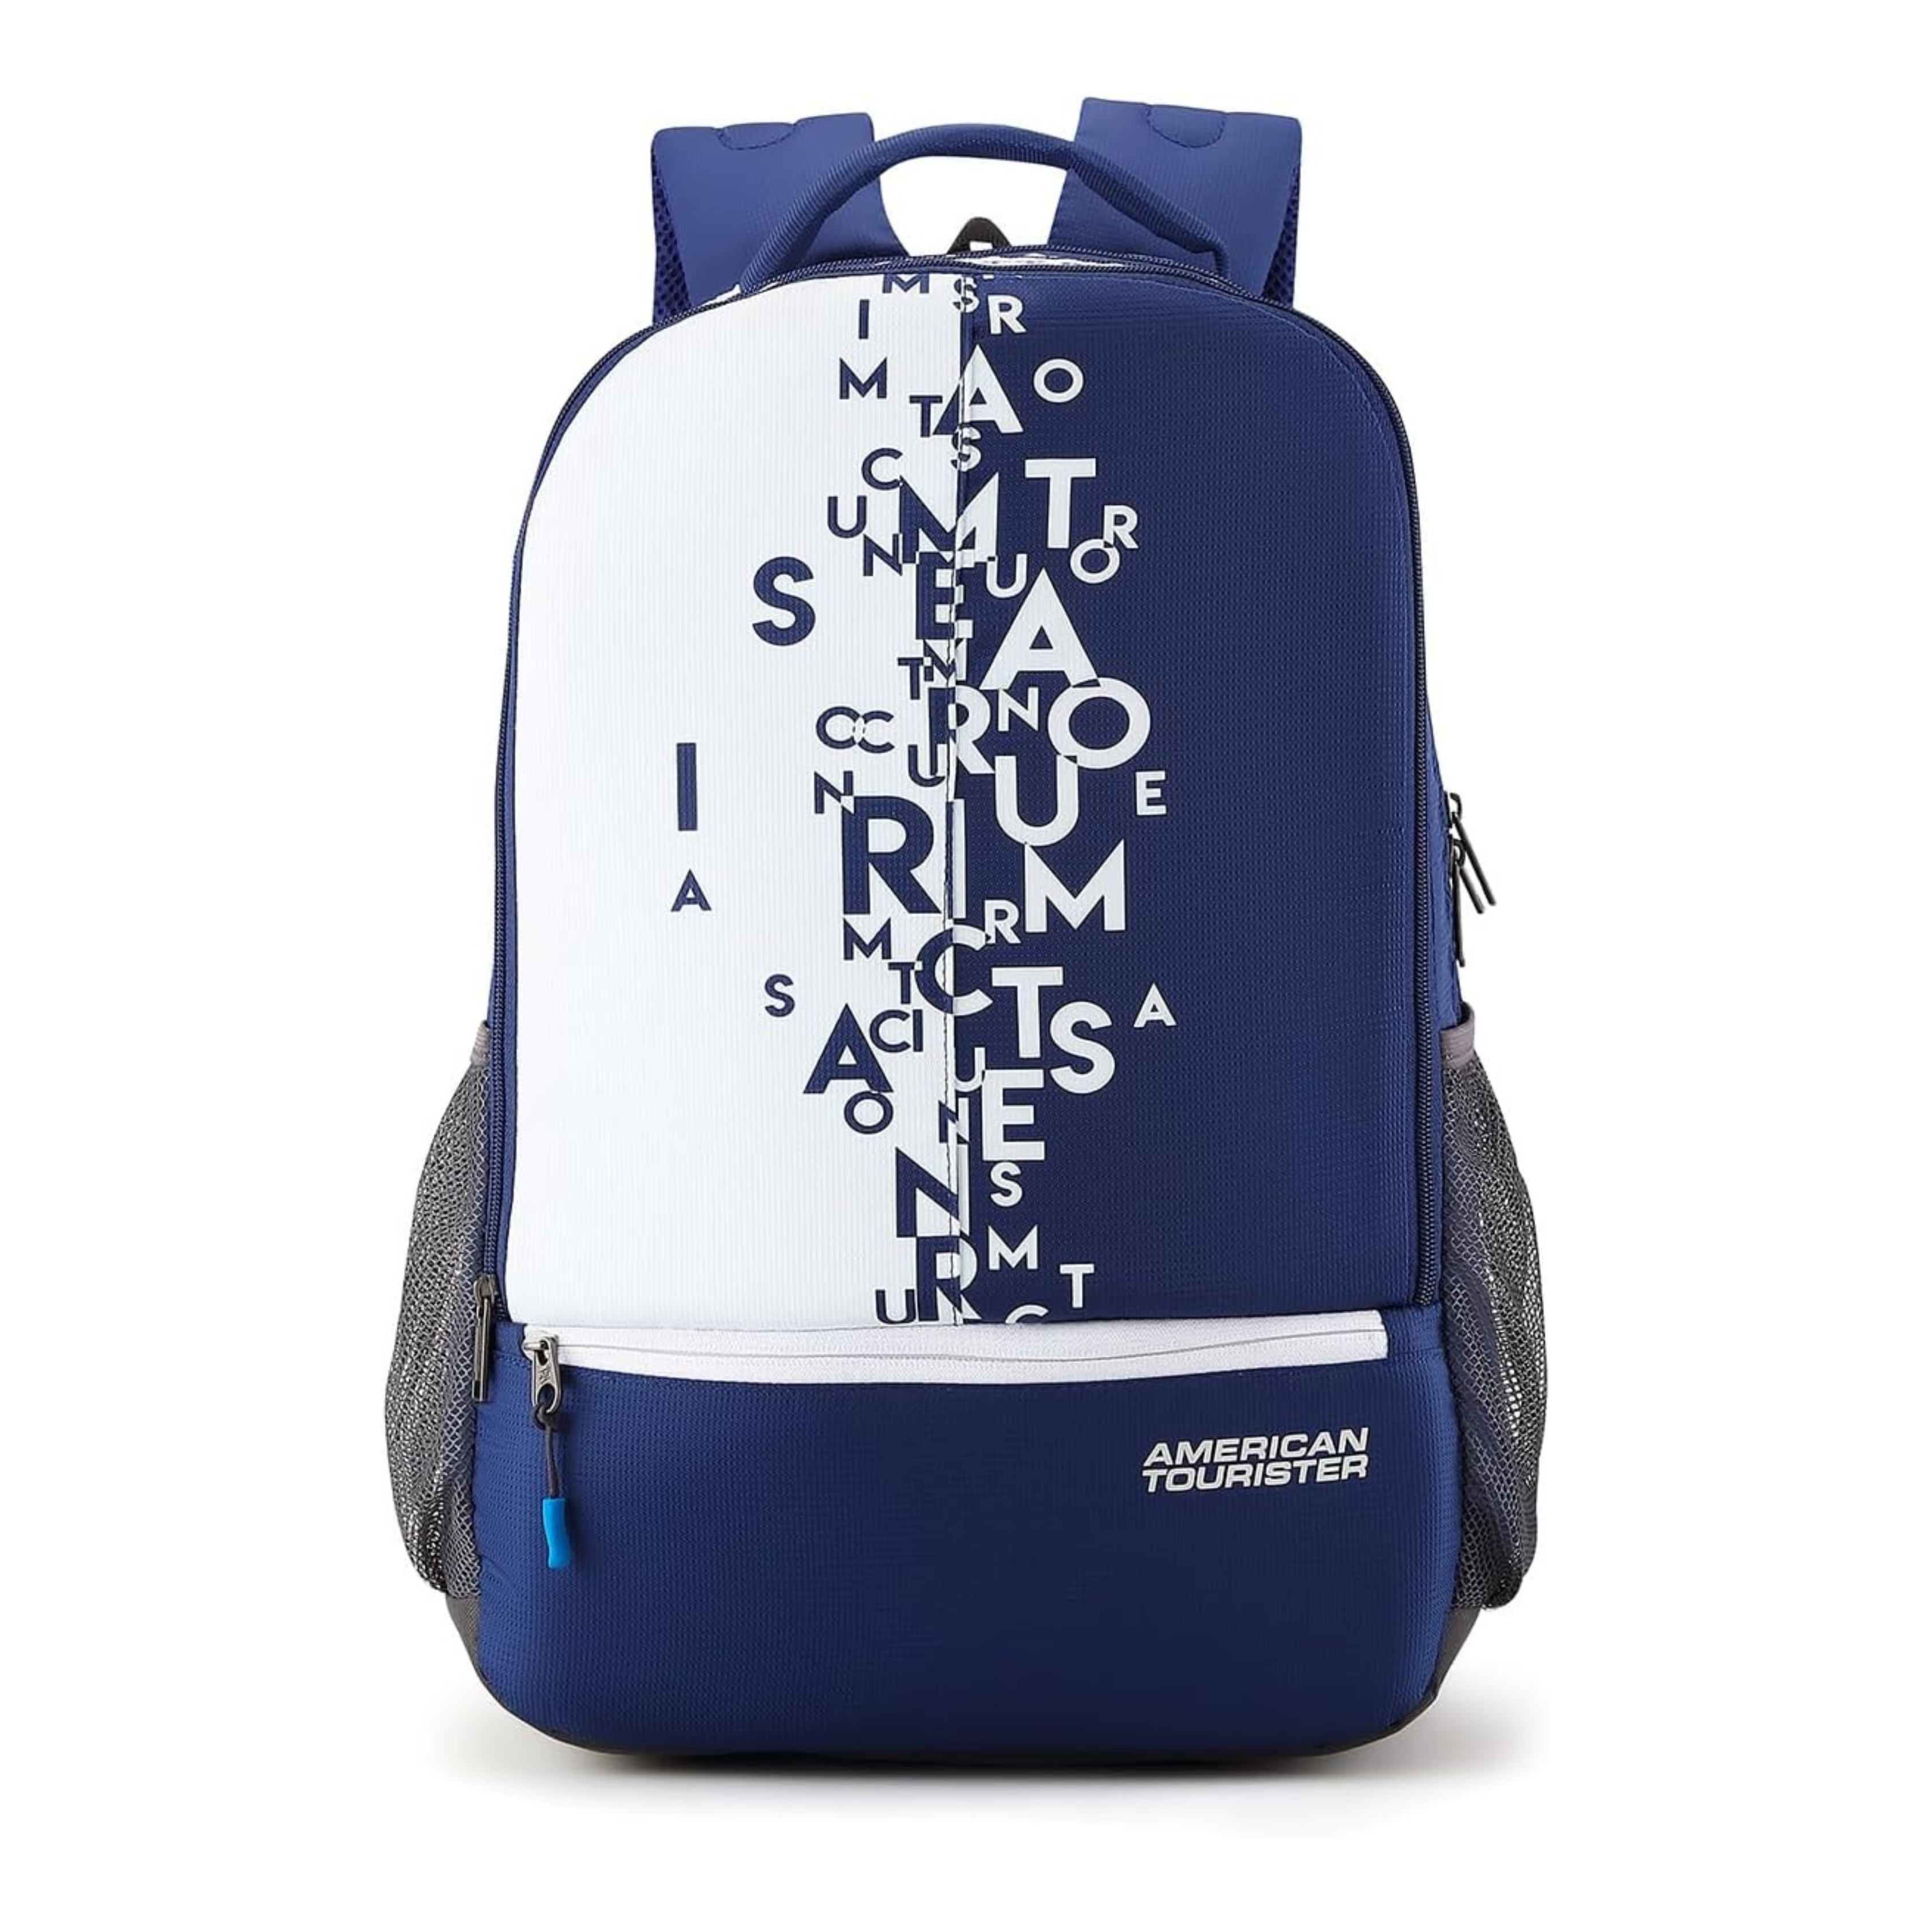 American Tourister Unisex Fizz Backpack